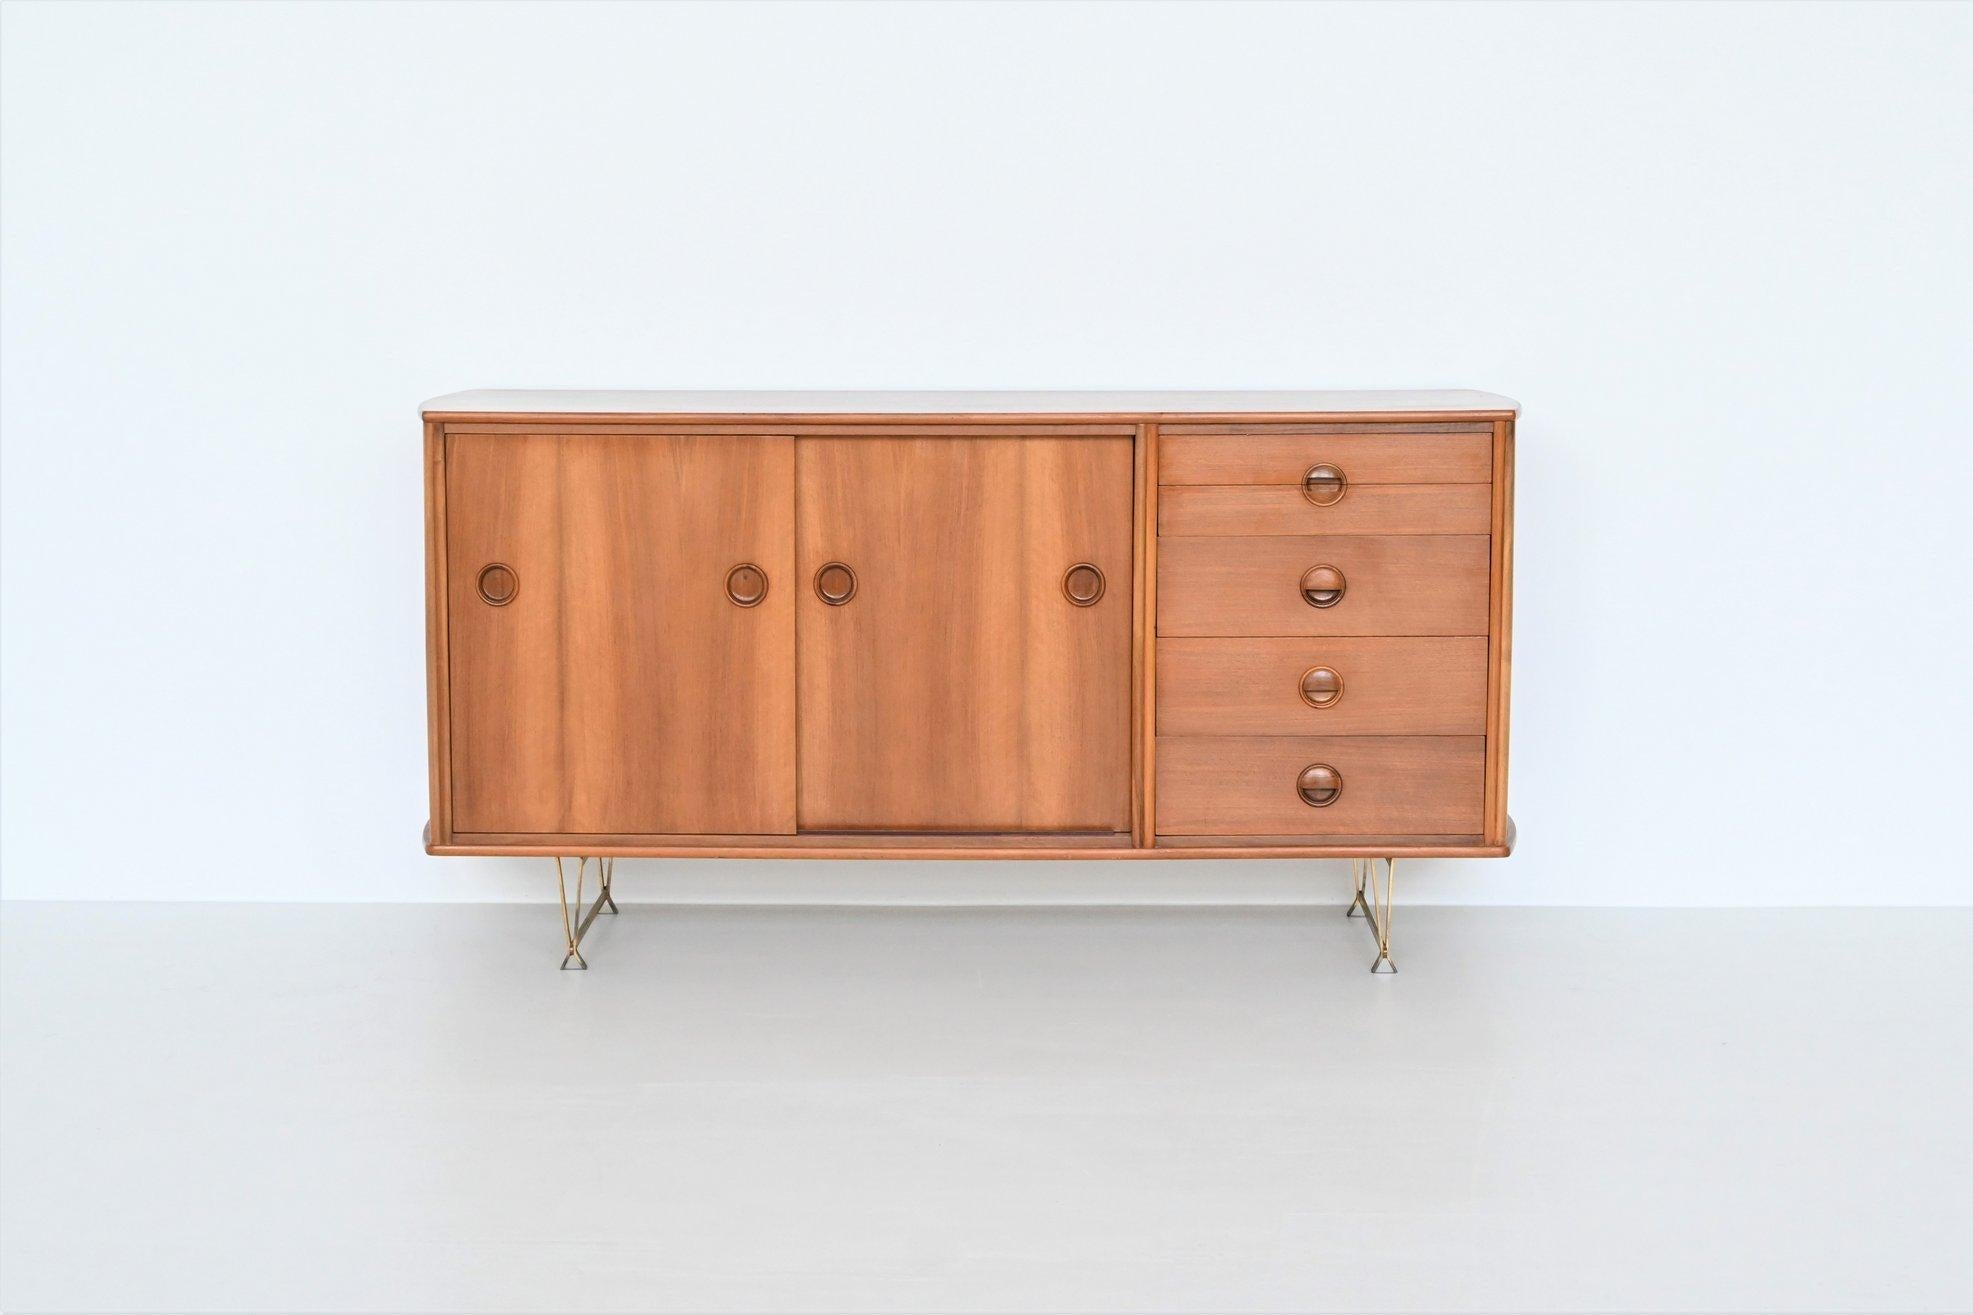 Beautiful sideboard designed by William Watting and manufactured by Fristho Franeker, The Netherlands 1960. This nicely refined cabinet is made of high quality walnut wood and has a beautiful warm grain to the veneer. It has two sliding doors with